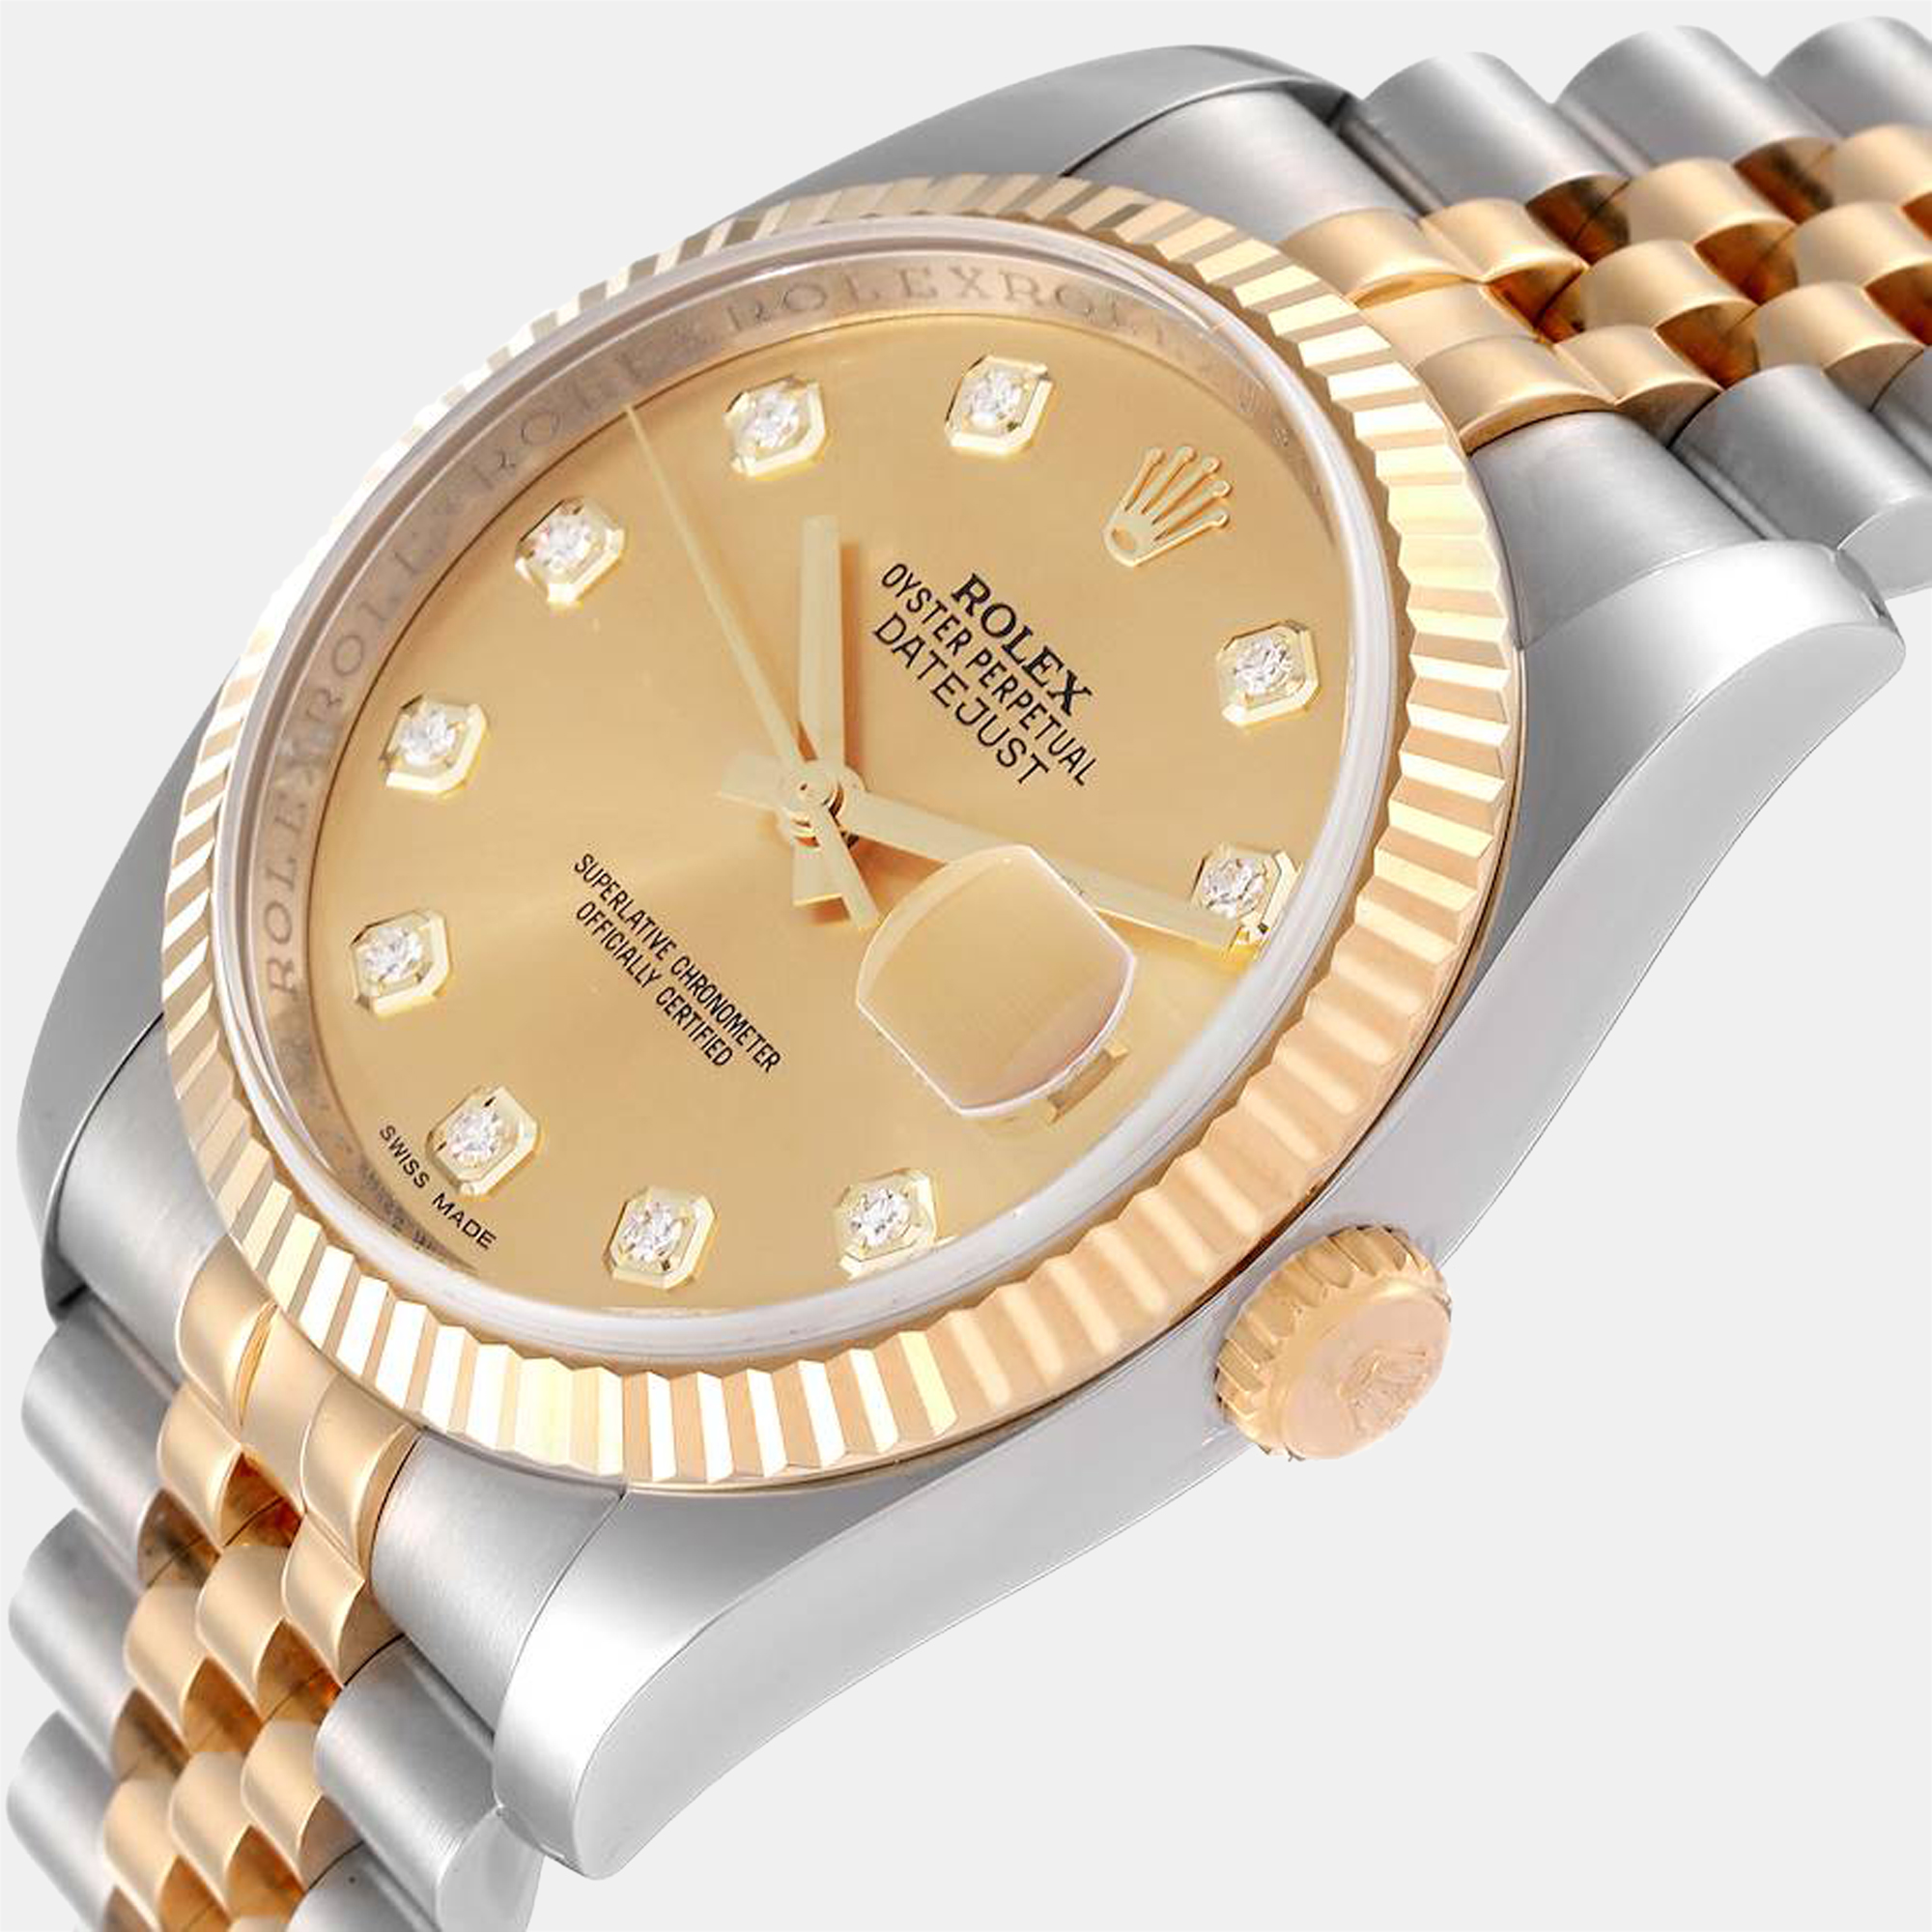 

Rolex Champagne Diamonds 18k Yellow Gold And Stainless Steel Datejust 16233 Men's Wristwatch 36 mm